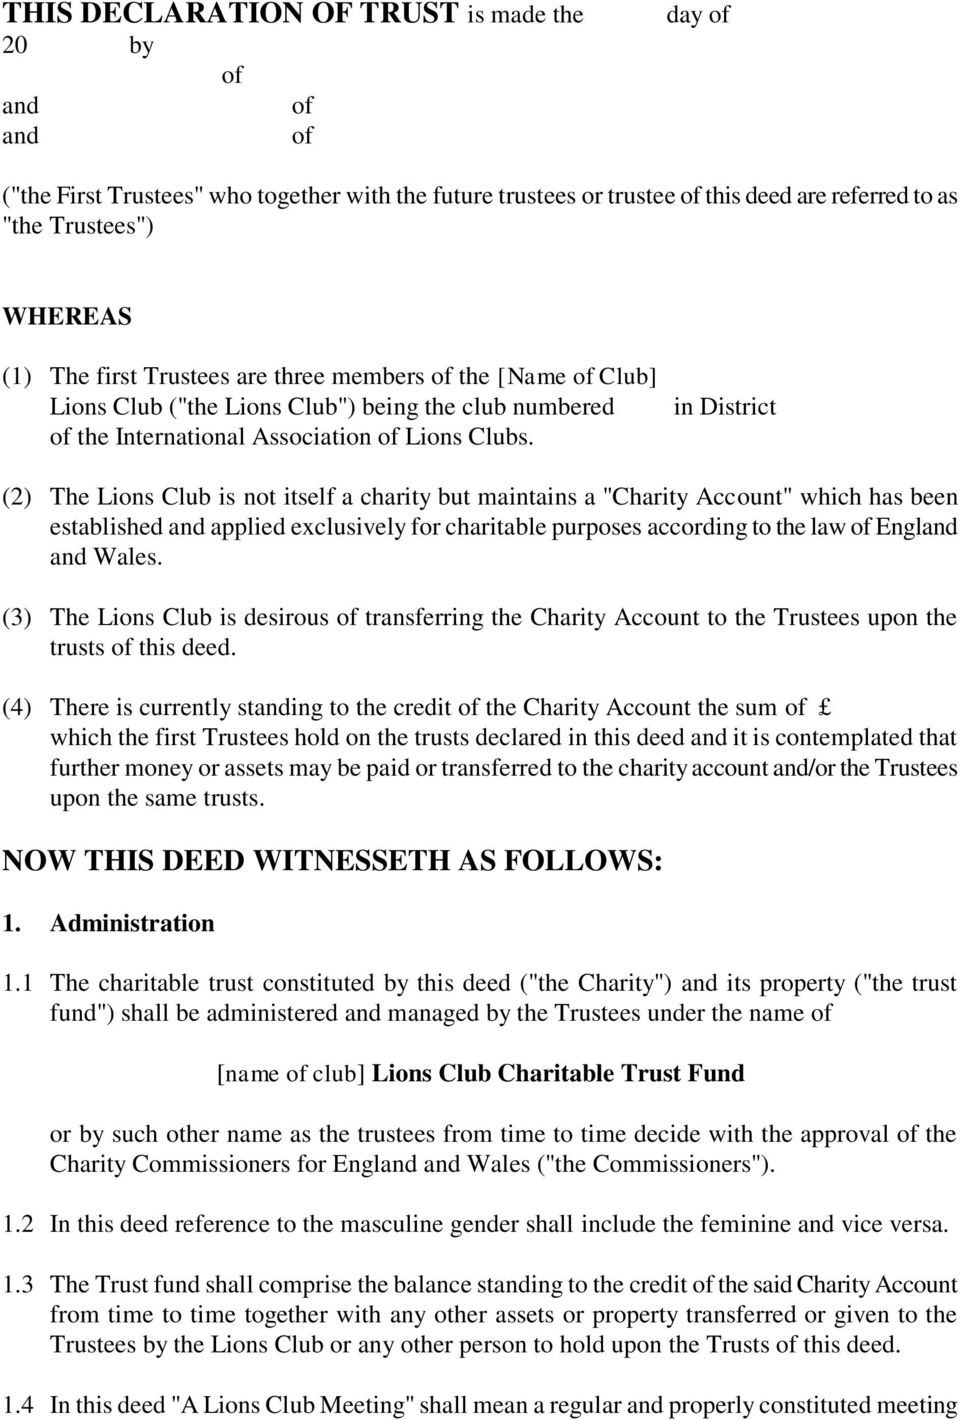 in District (2) The Lions Club is not itself a charity but maintains a "Charity Account" which has been established and applied exclusively for charitable purposes according to the law of England and